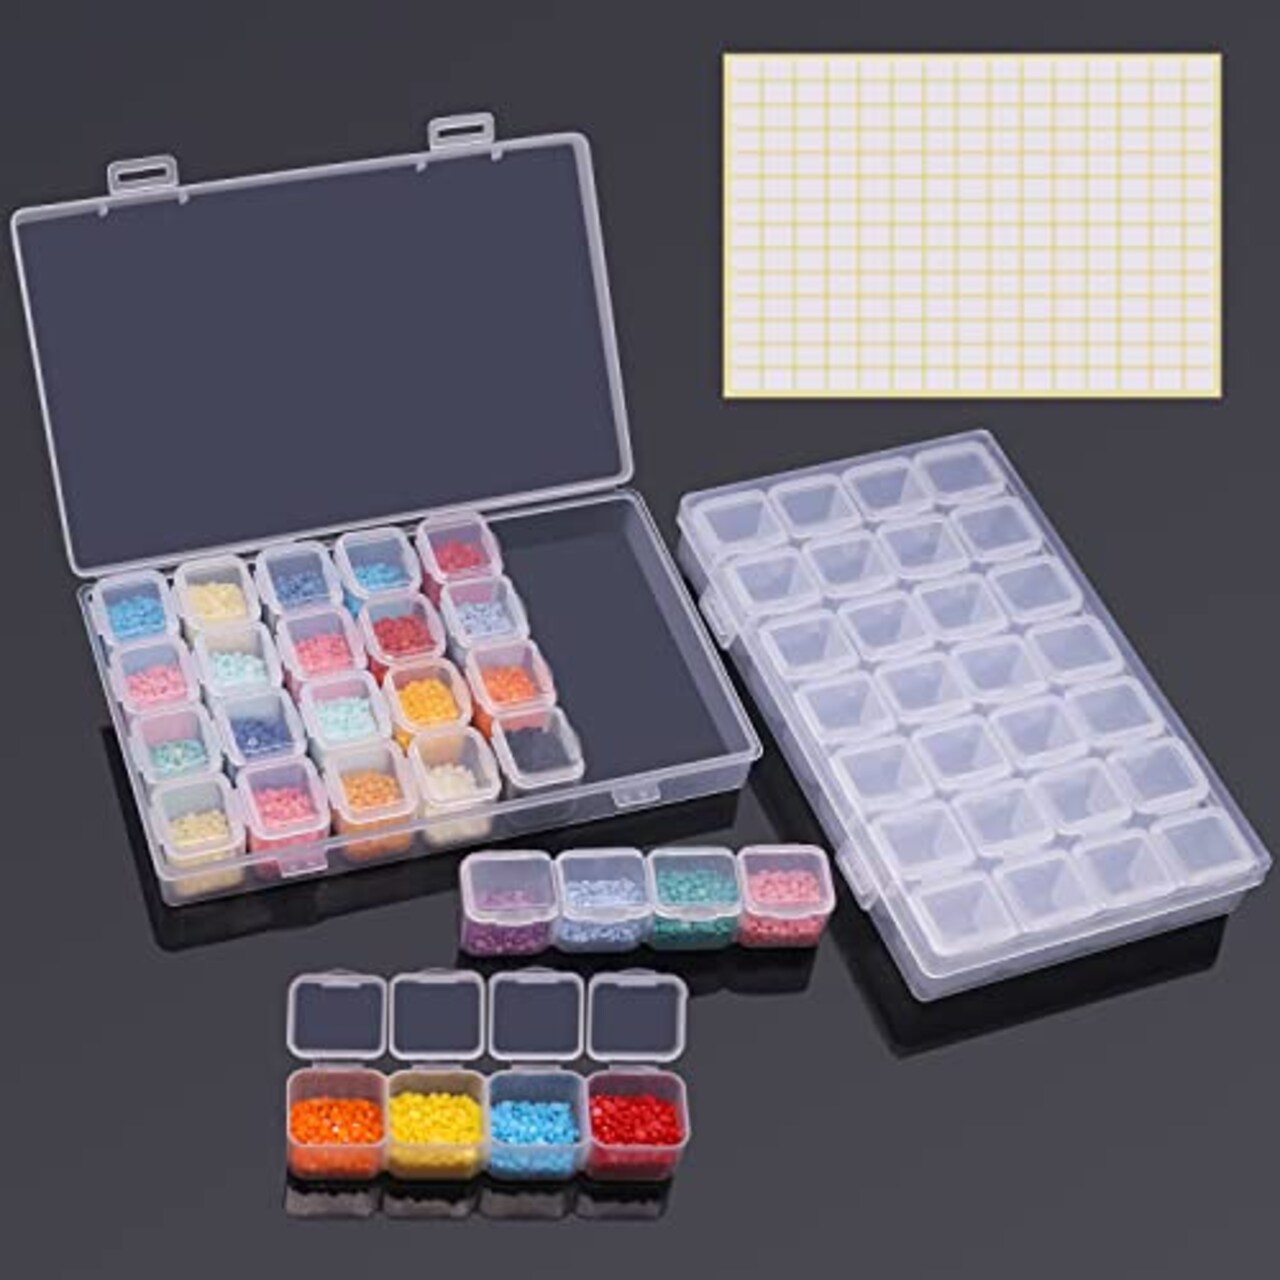 ARTDOT 28 Girds 2 Pack Diamond Painting Storage Containers Portable Bead  Storage Container for Diamond Painting Accessories